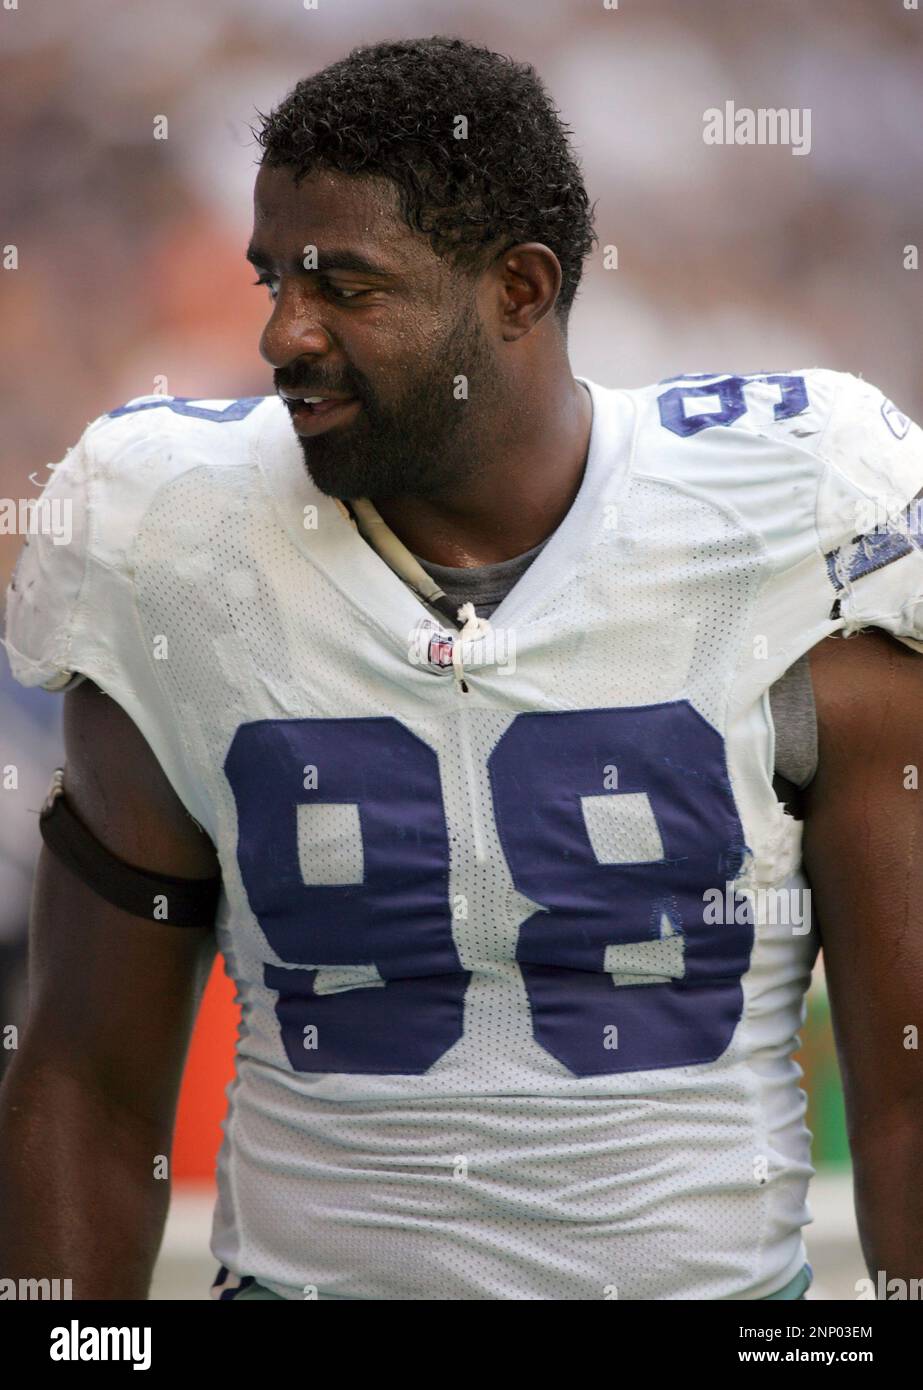 26 OCT 2008: Greg Ellis of the Cowboys during the game between the